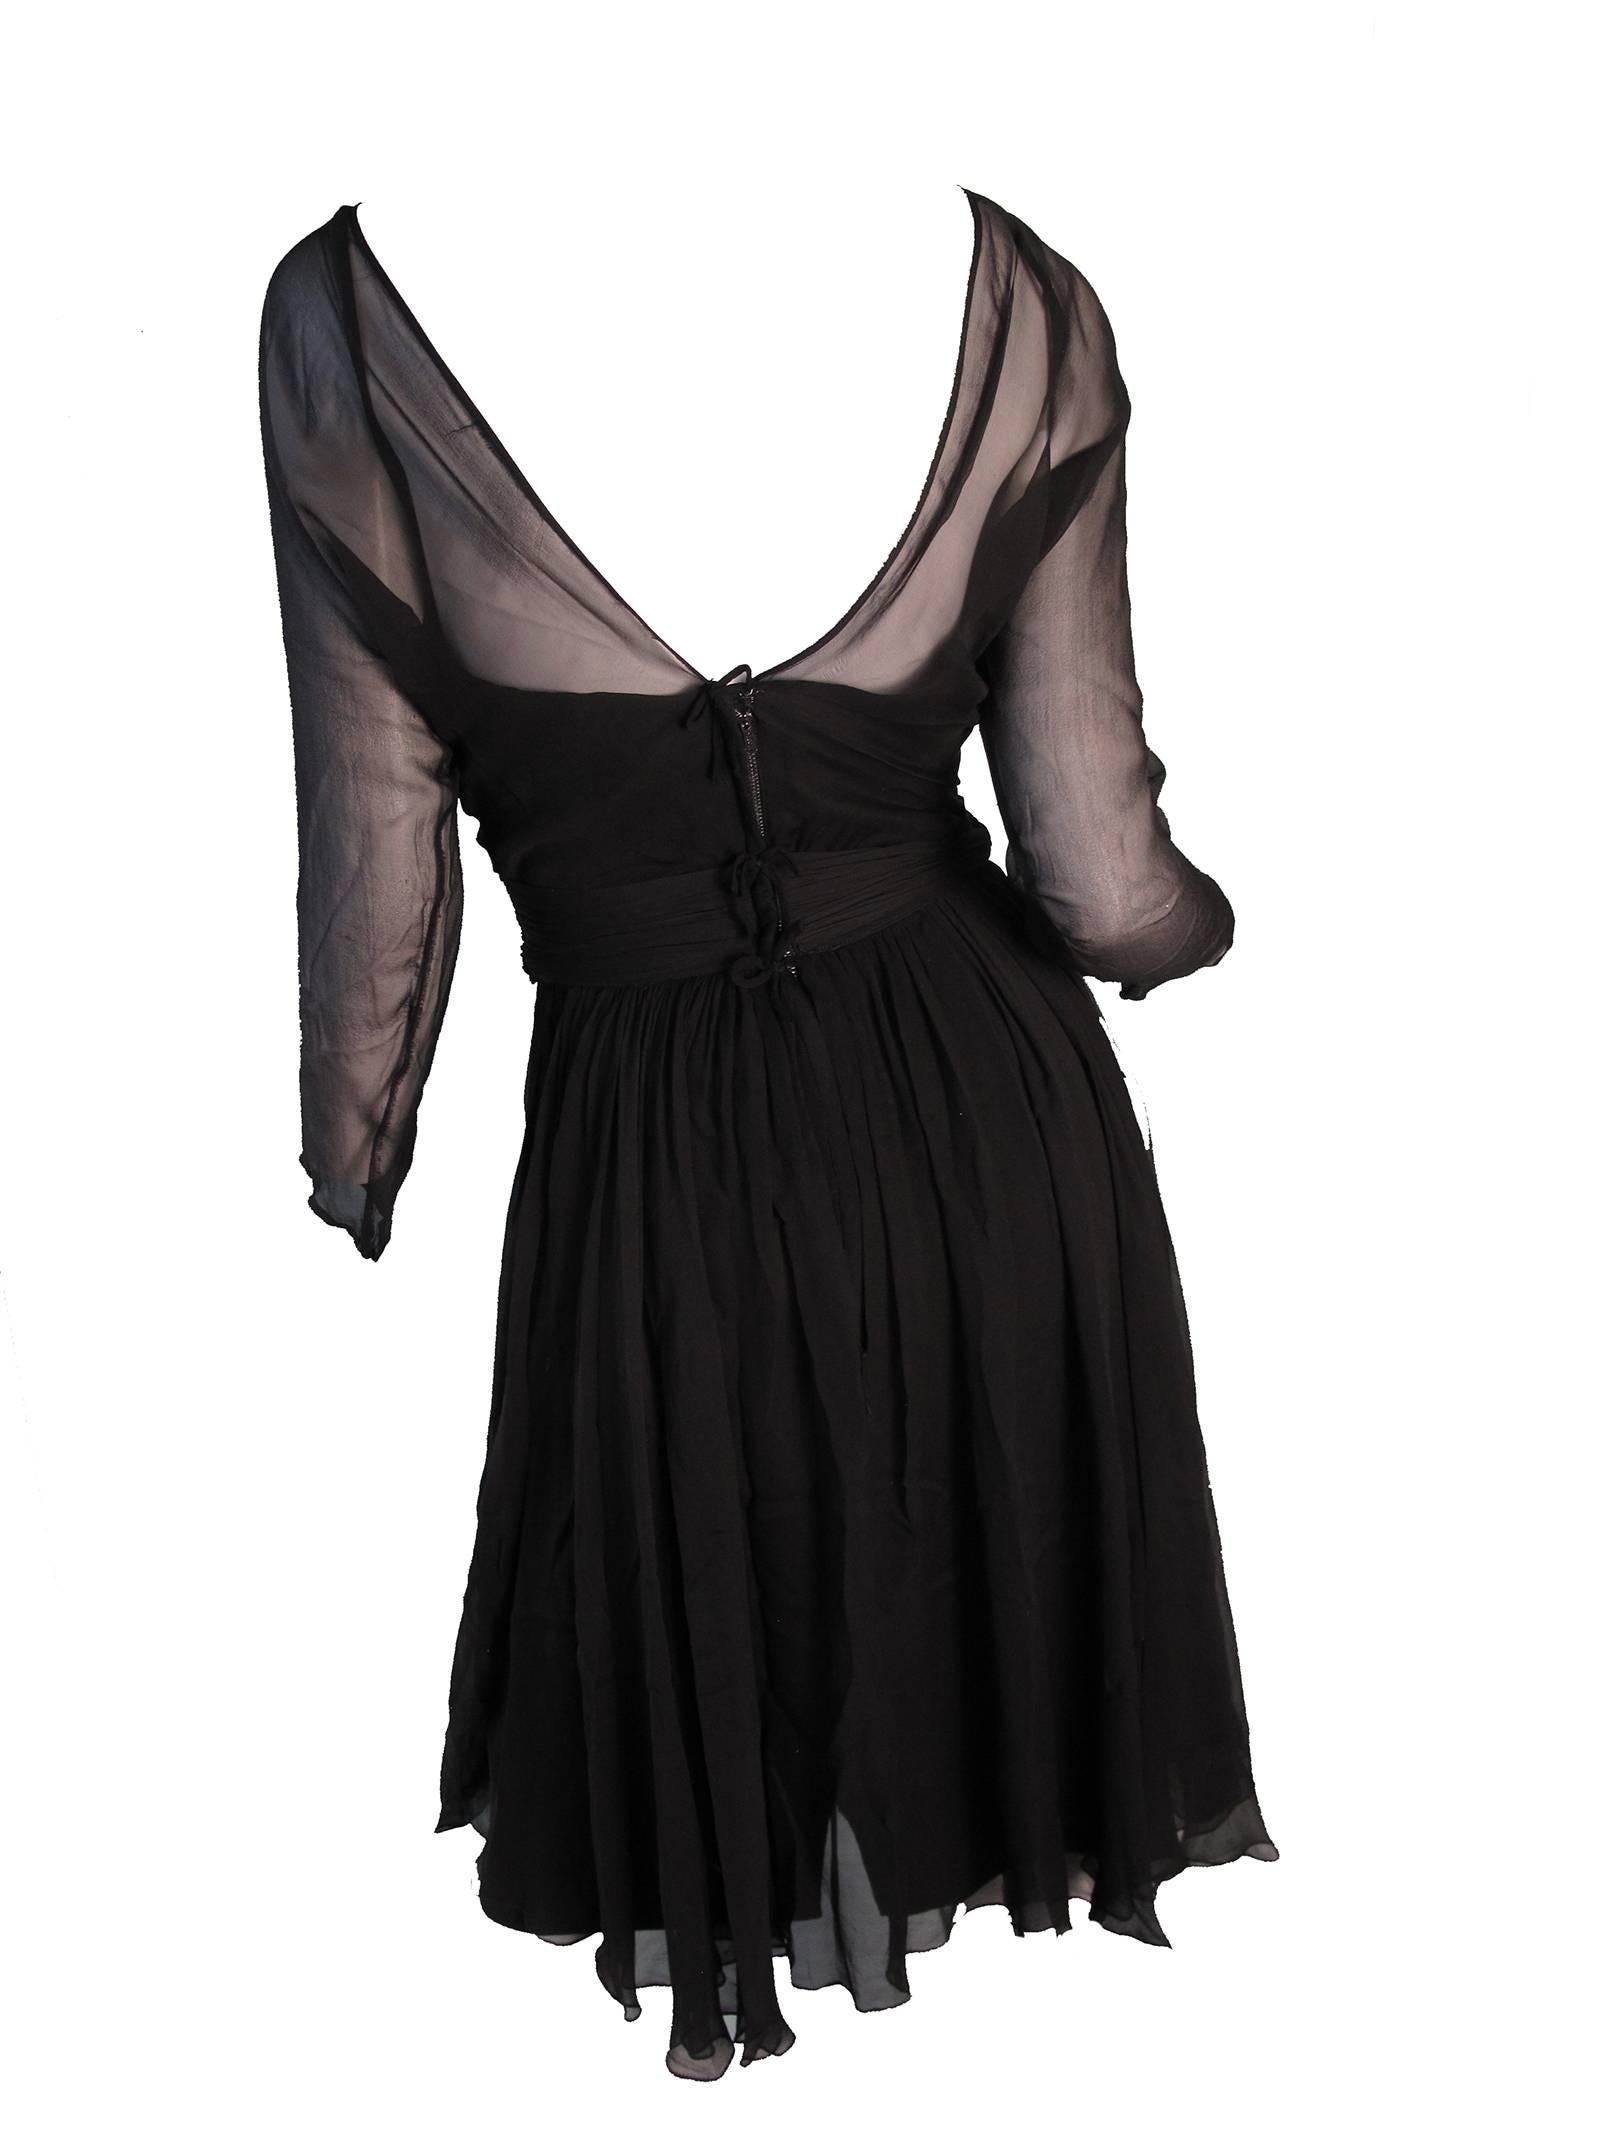 1950s black Bullocks Wilshire cocktail dress. Condition: Good.  Size Med ( mannequin is a US size 6)
We accept returns for refund, please see our terms.  We offer free ground shipping within the US. 